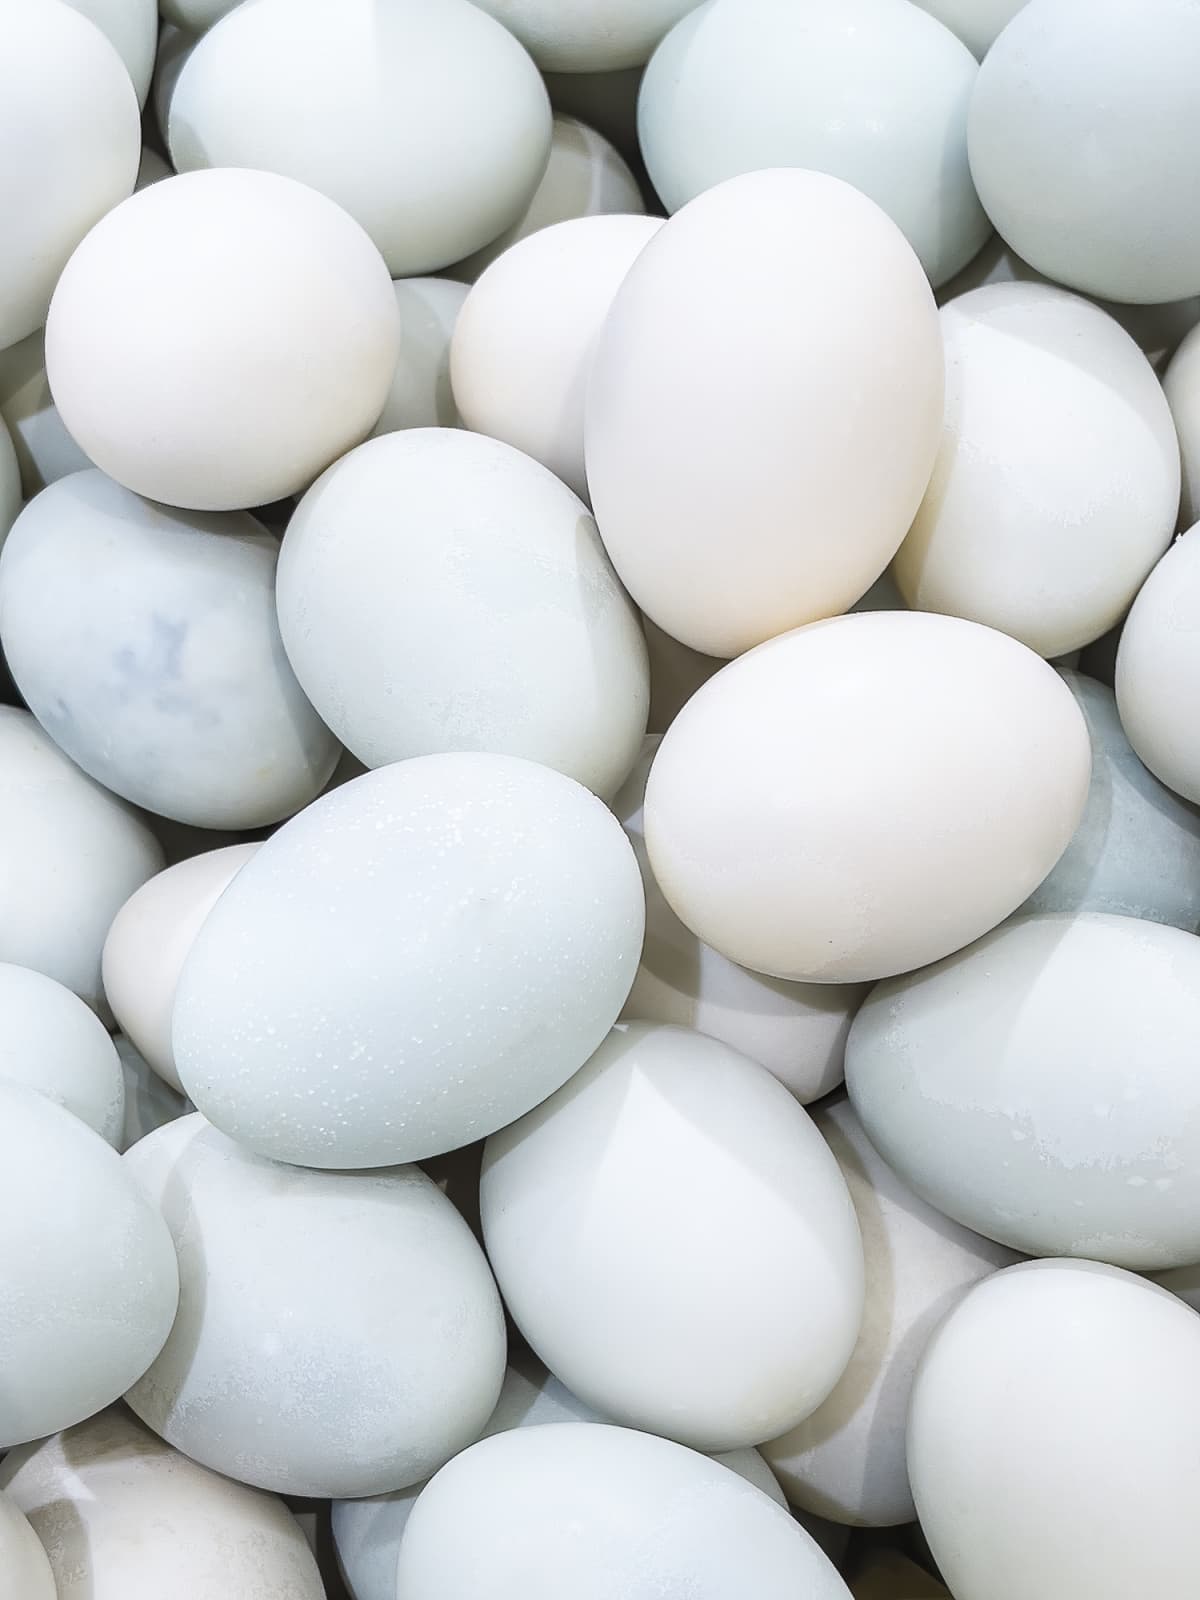 Abstract pattern of irregularly stacked duck eggs